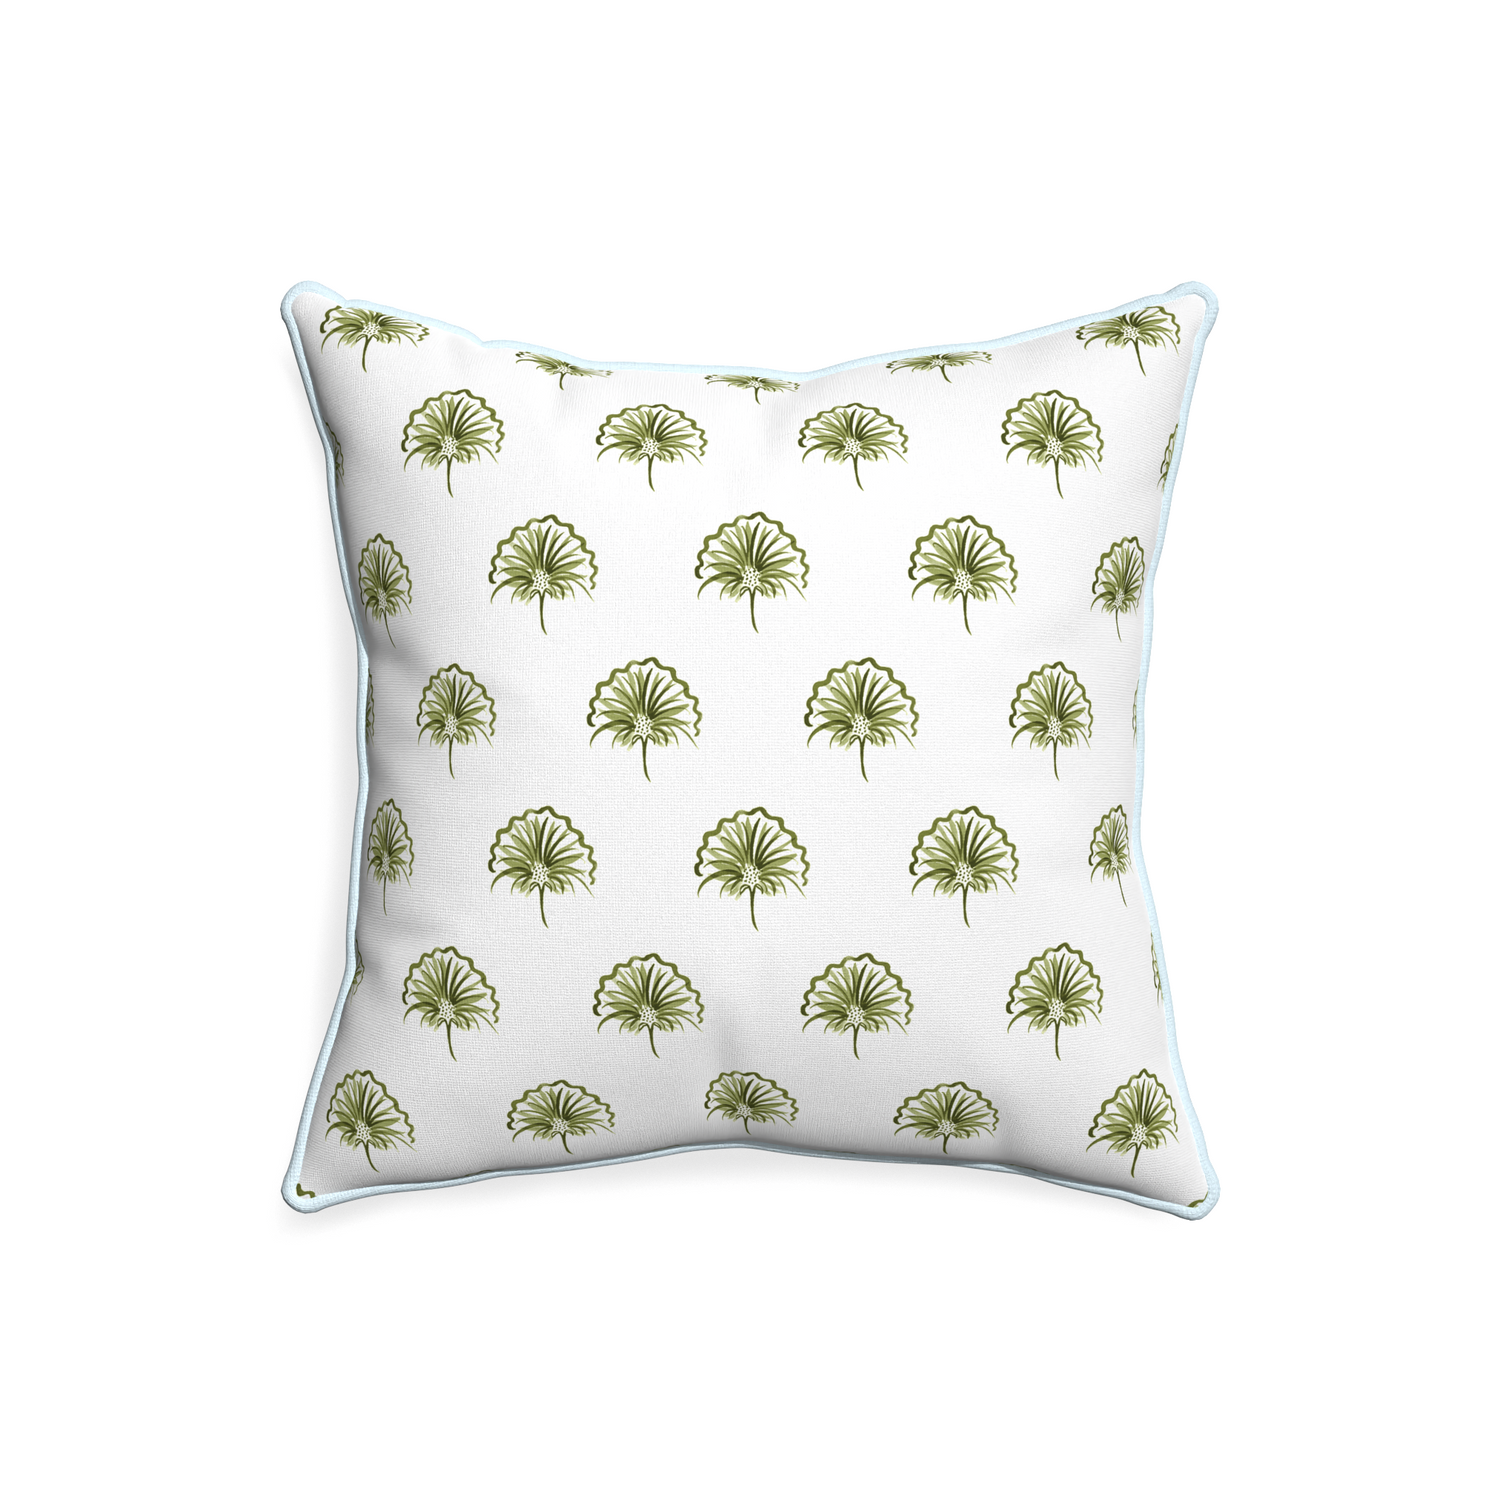 20-square penelope moss custom green floralpillow with powder piping on white background